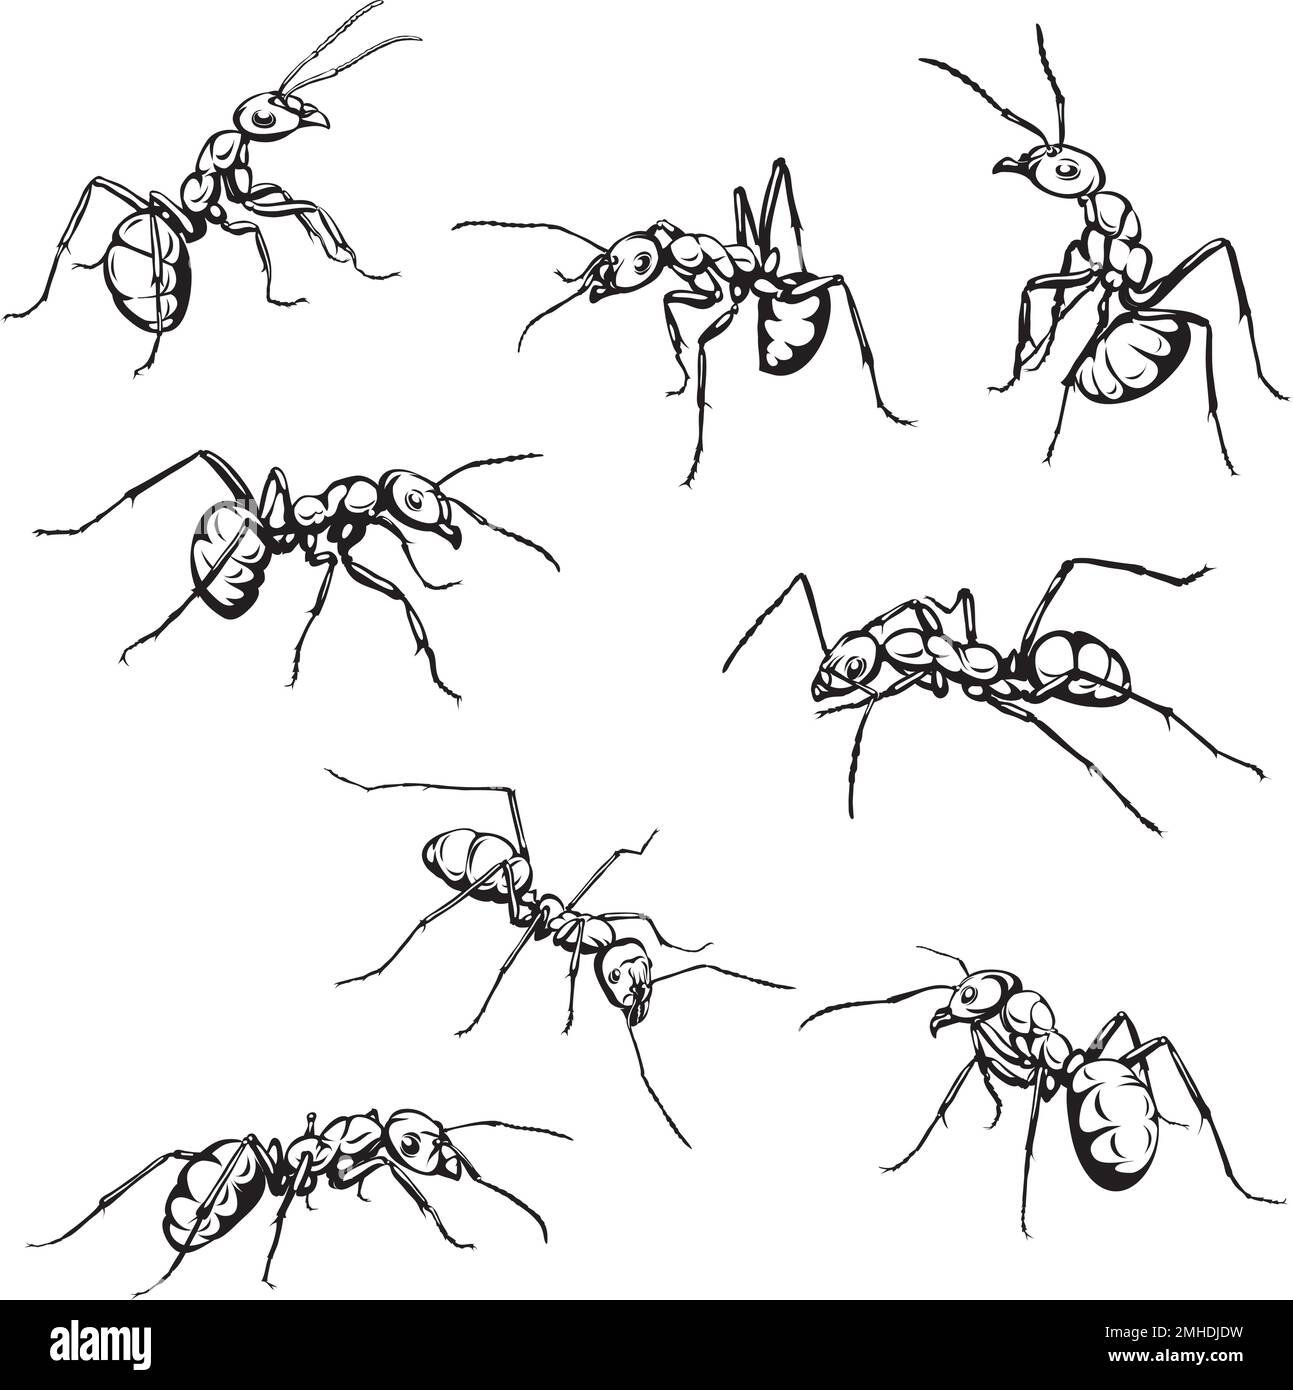 ant, insect, crawling, black, vector, drawing, silhouette, eyes, design, symbol, picture, isolated, illustration, large, abdomen, paws, nature, realis Stock Vector